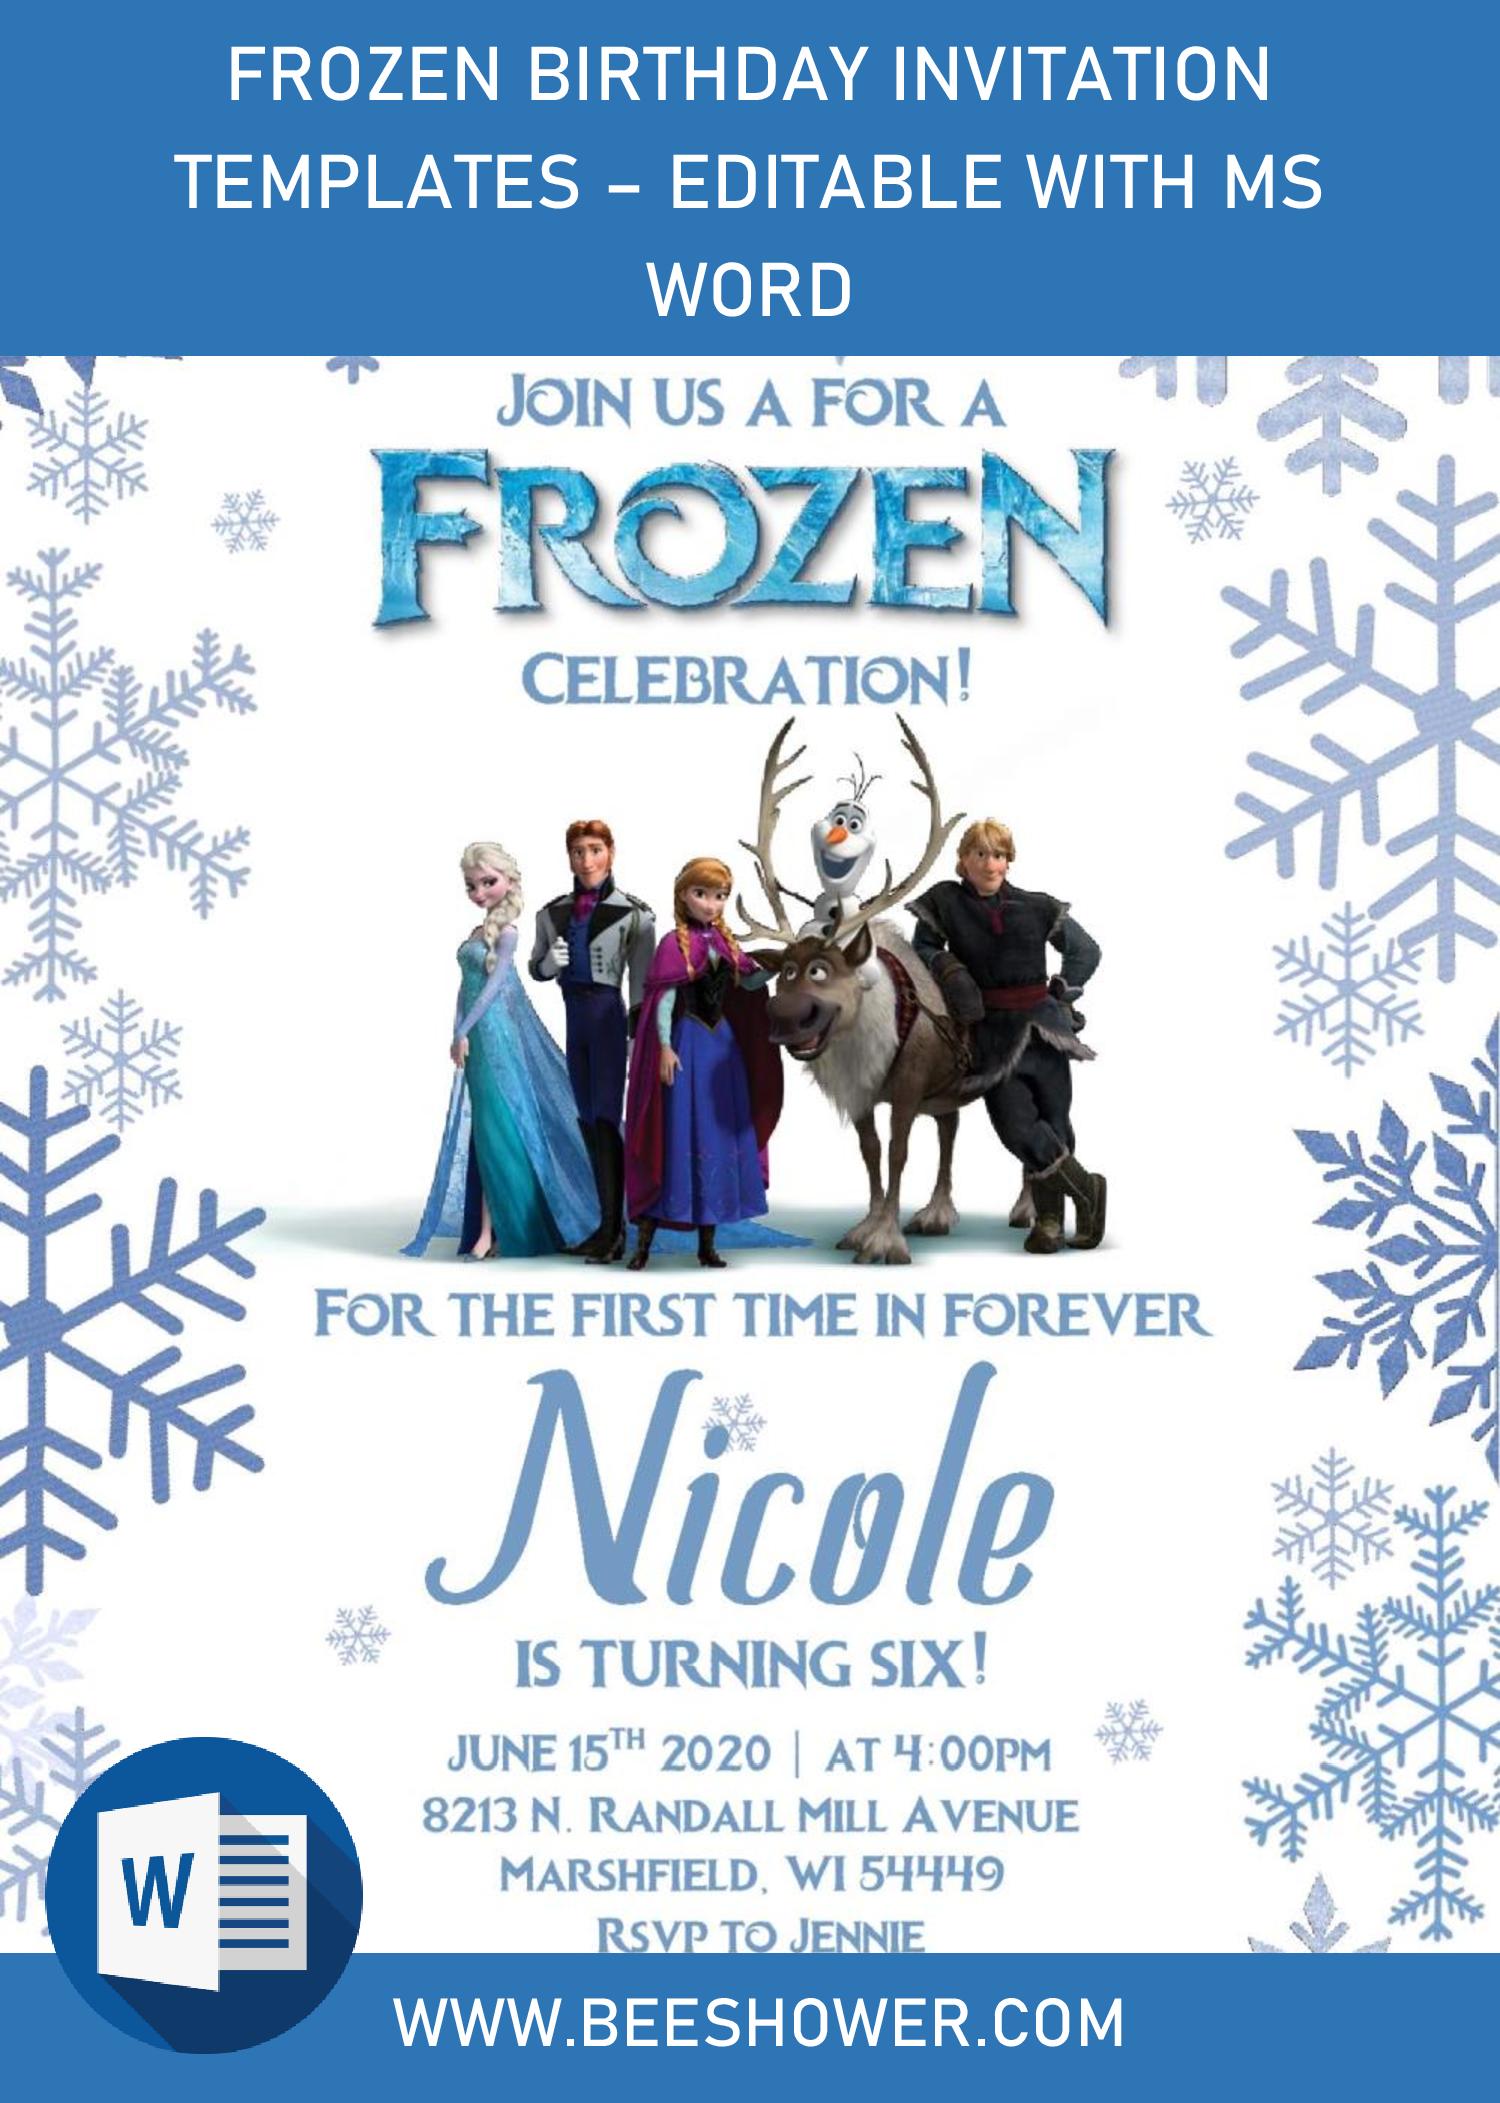 Frozen Invitation Templates Editable With Ms Word Free Printable Baby Shower Invitations Templates